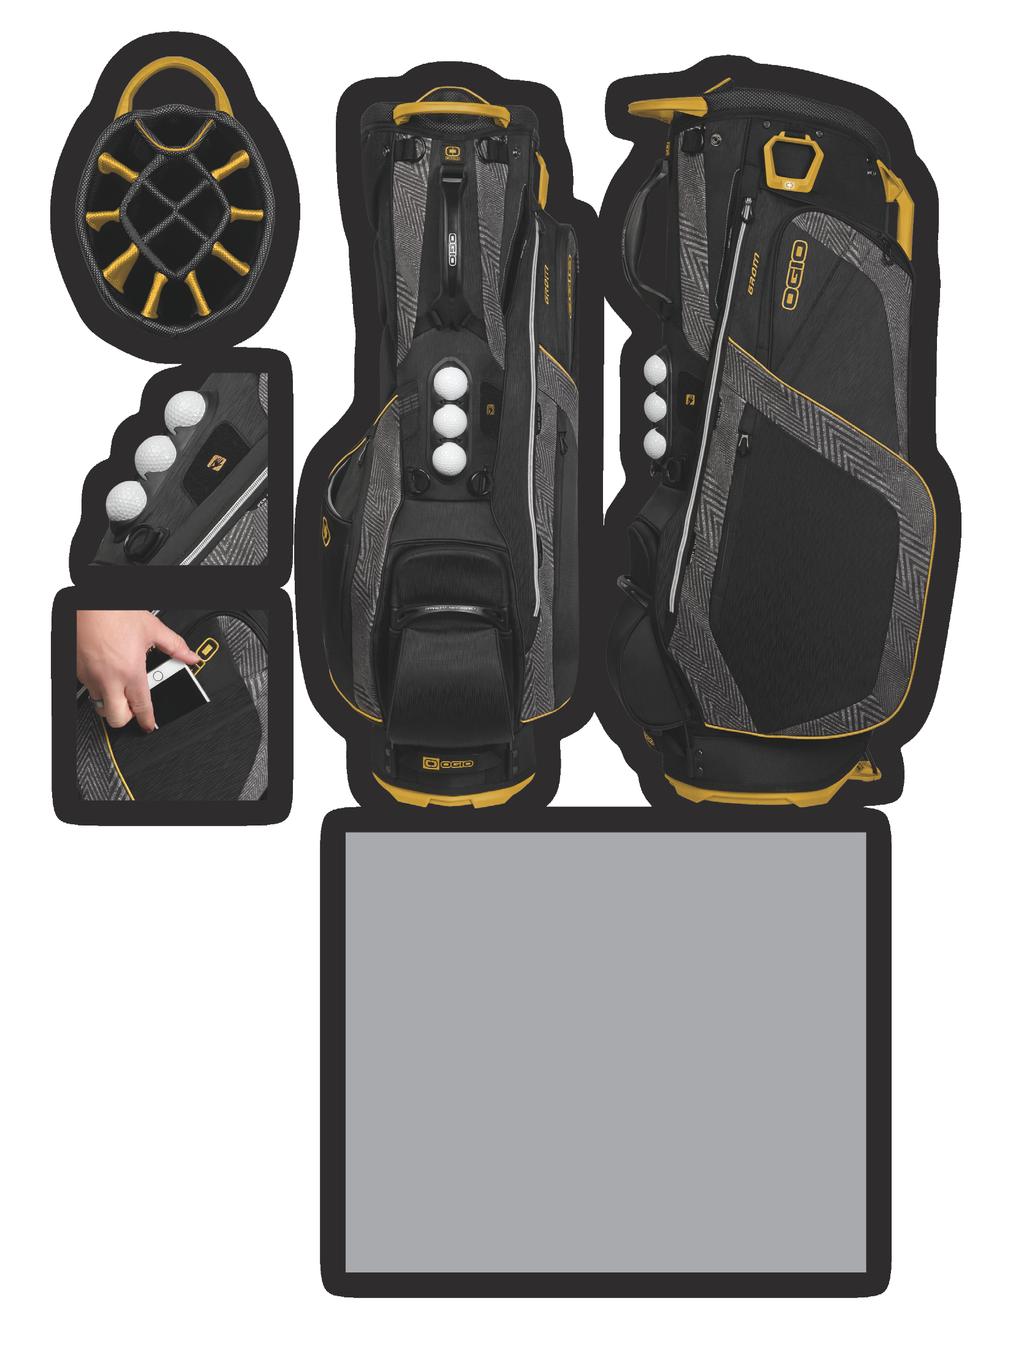 QUALITY AND INNOVATION 3 1 4 2 2 INNOVATIONS: STAND BAGS 4 1 DIAMOND ULTRALITE PERFORMANCE TOP The Diamond Ultralite top encompasses the ultimate design for performance.